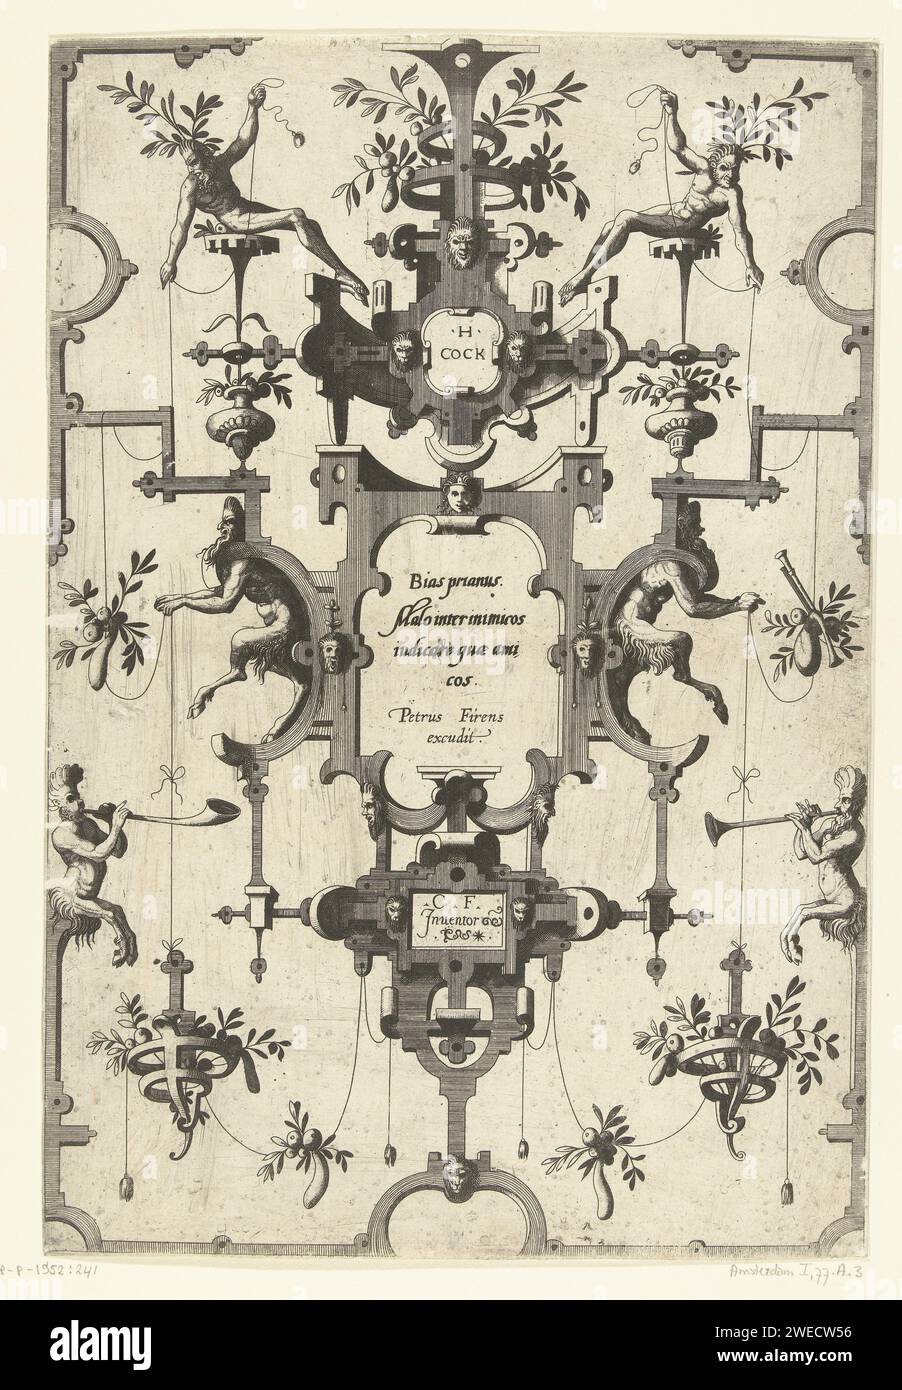 Cartouche with text of bias between two saters in Rolwerk, Johannes or Lucas van Doetechum, after Cornelis Floris (II), 1558 - 1630 print At the bottom left and bottom right is on the rolling work that blows on a trumpet. One of 4 magazines from a series of 6. Second edition of a series of flat decorations designed by Cornelis Floris (Orn Cat I-77.1 to 77.6). Netherlands (possibly) paper etching Stock Photo